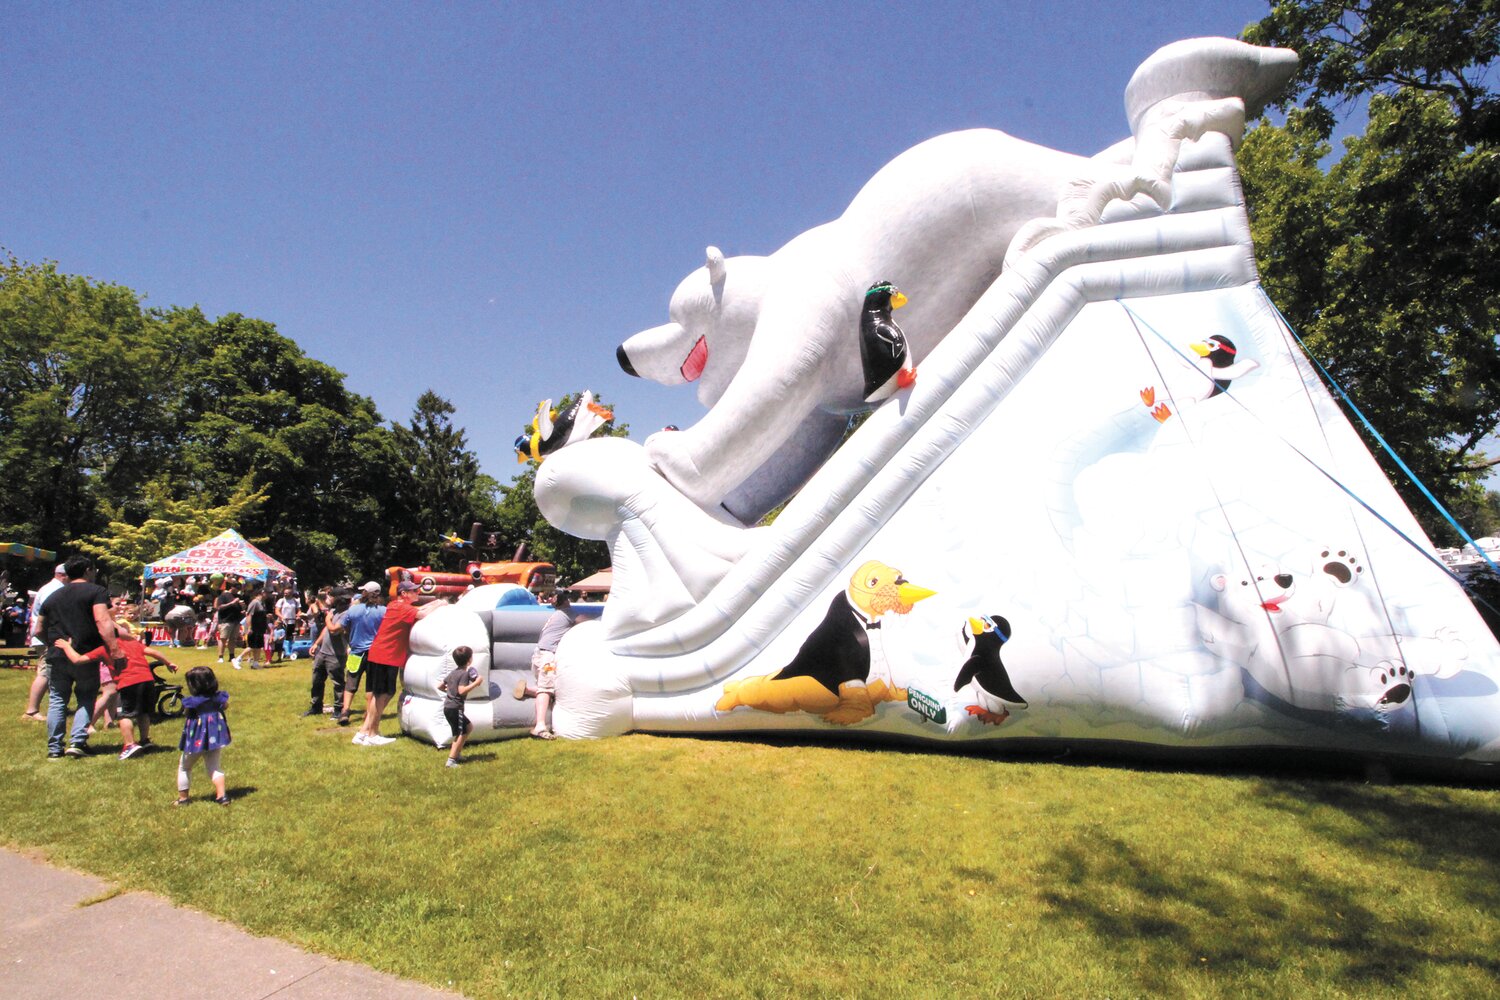 THEY COULD BEARLY RESIST: Children , for that matter no one, could miss the polar bear slide that dominated Pawtuxet Village Park during the arts and crafts festival